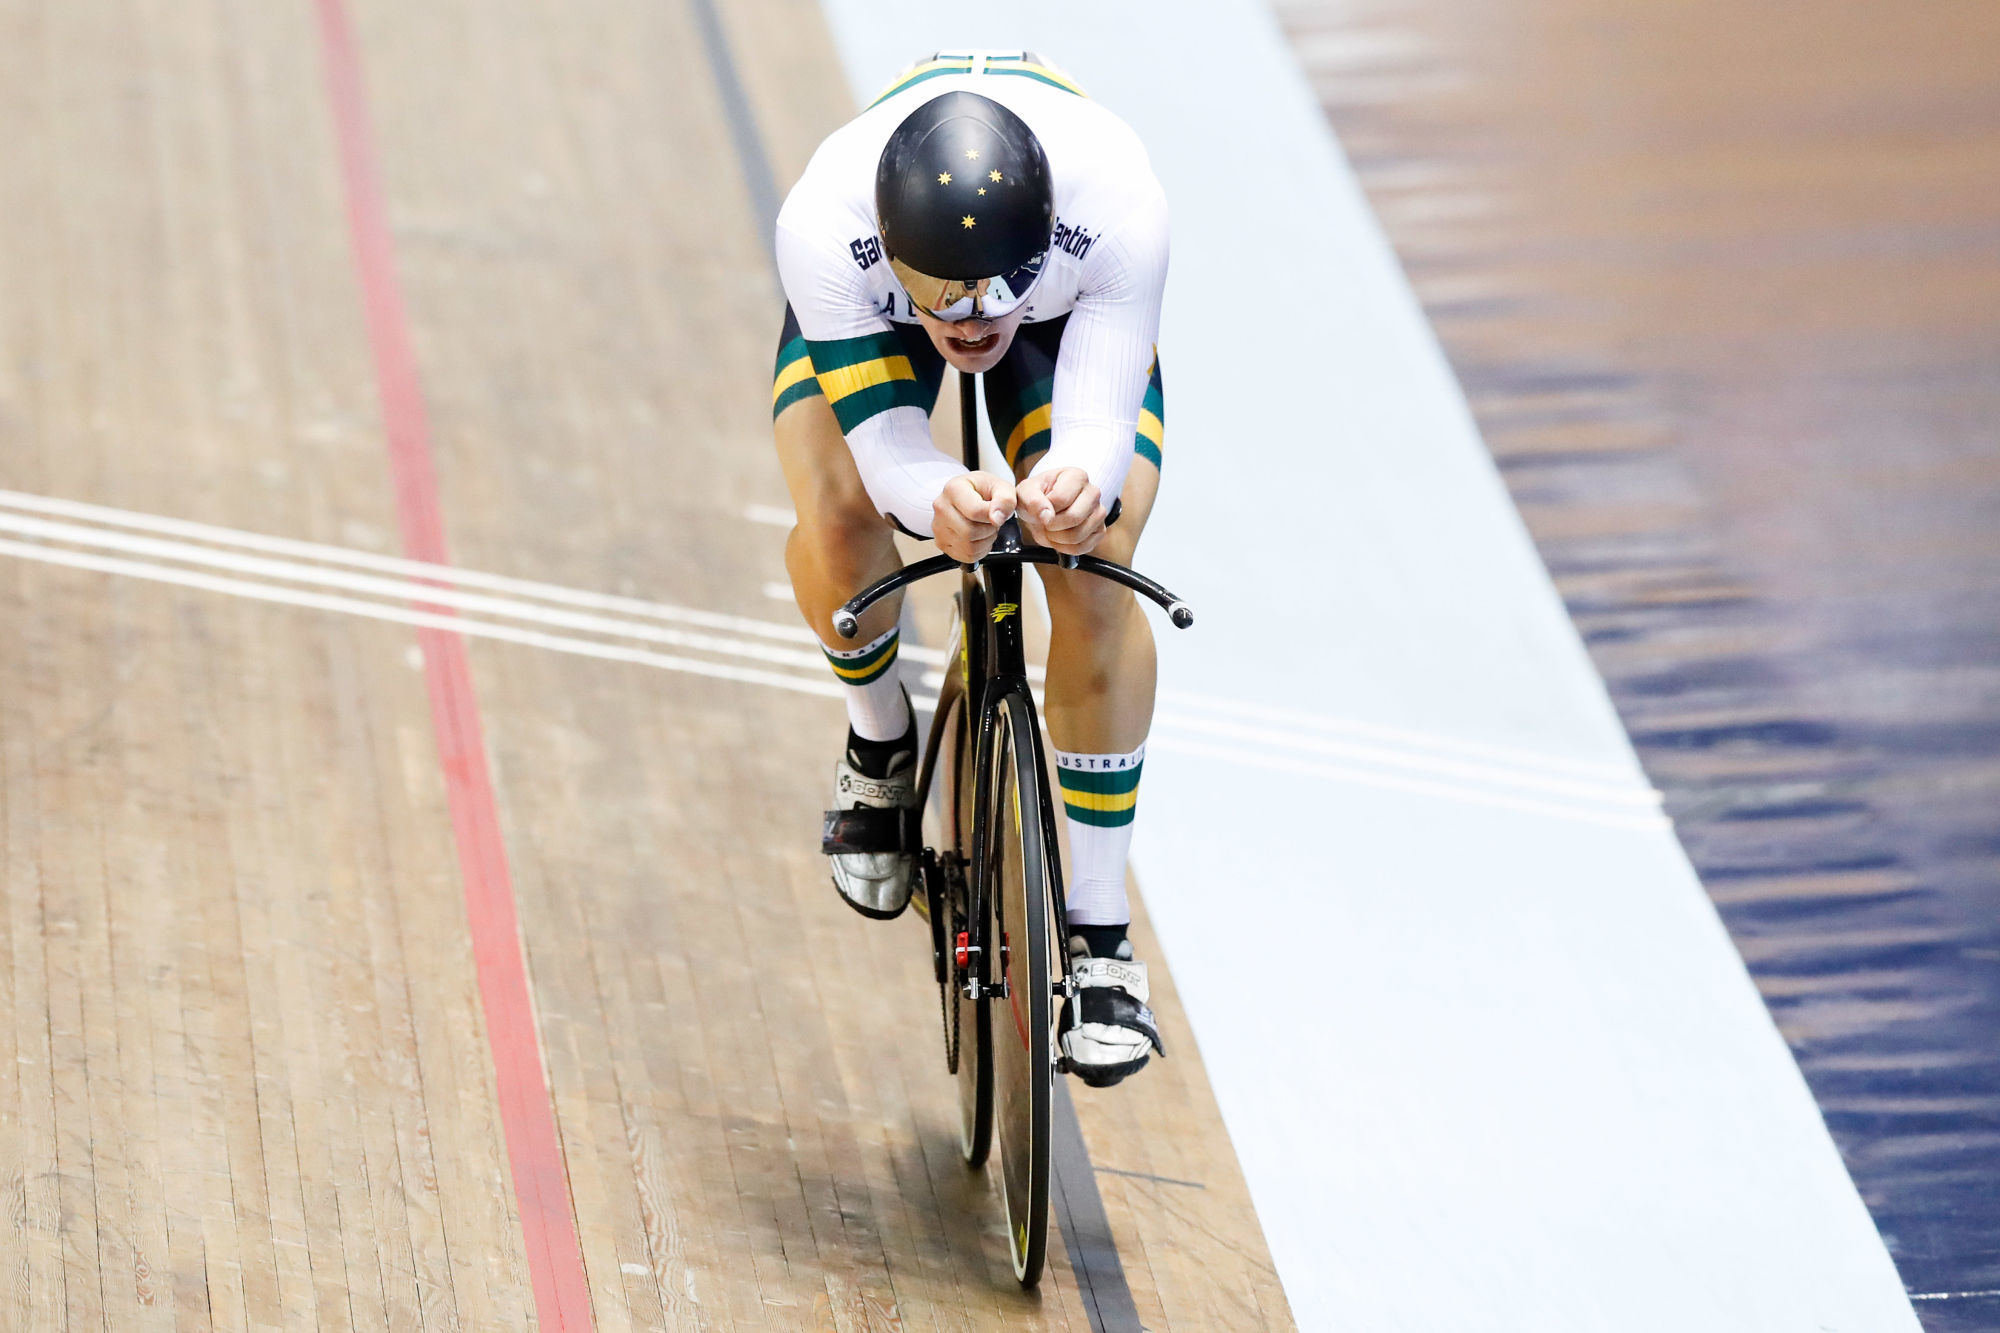 Australia's Matthew Glaetzer celebrates winning the Men's 1km time trial, during day three of the TISSOT UCI Track Cycling World Cup at the HSBC UK National Cycling Centre, Manchester. Photo : PA Images / Icon Sport